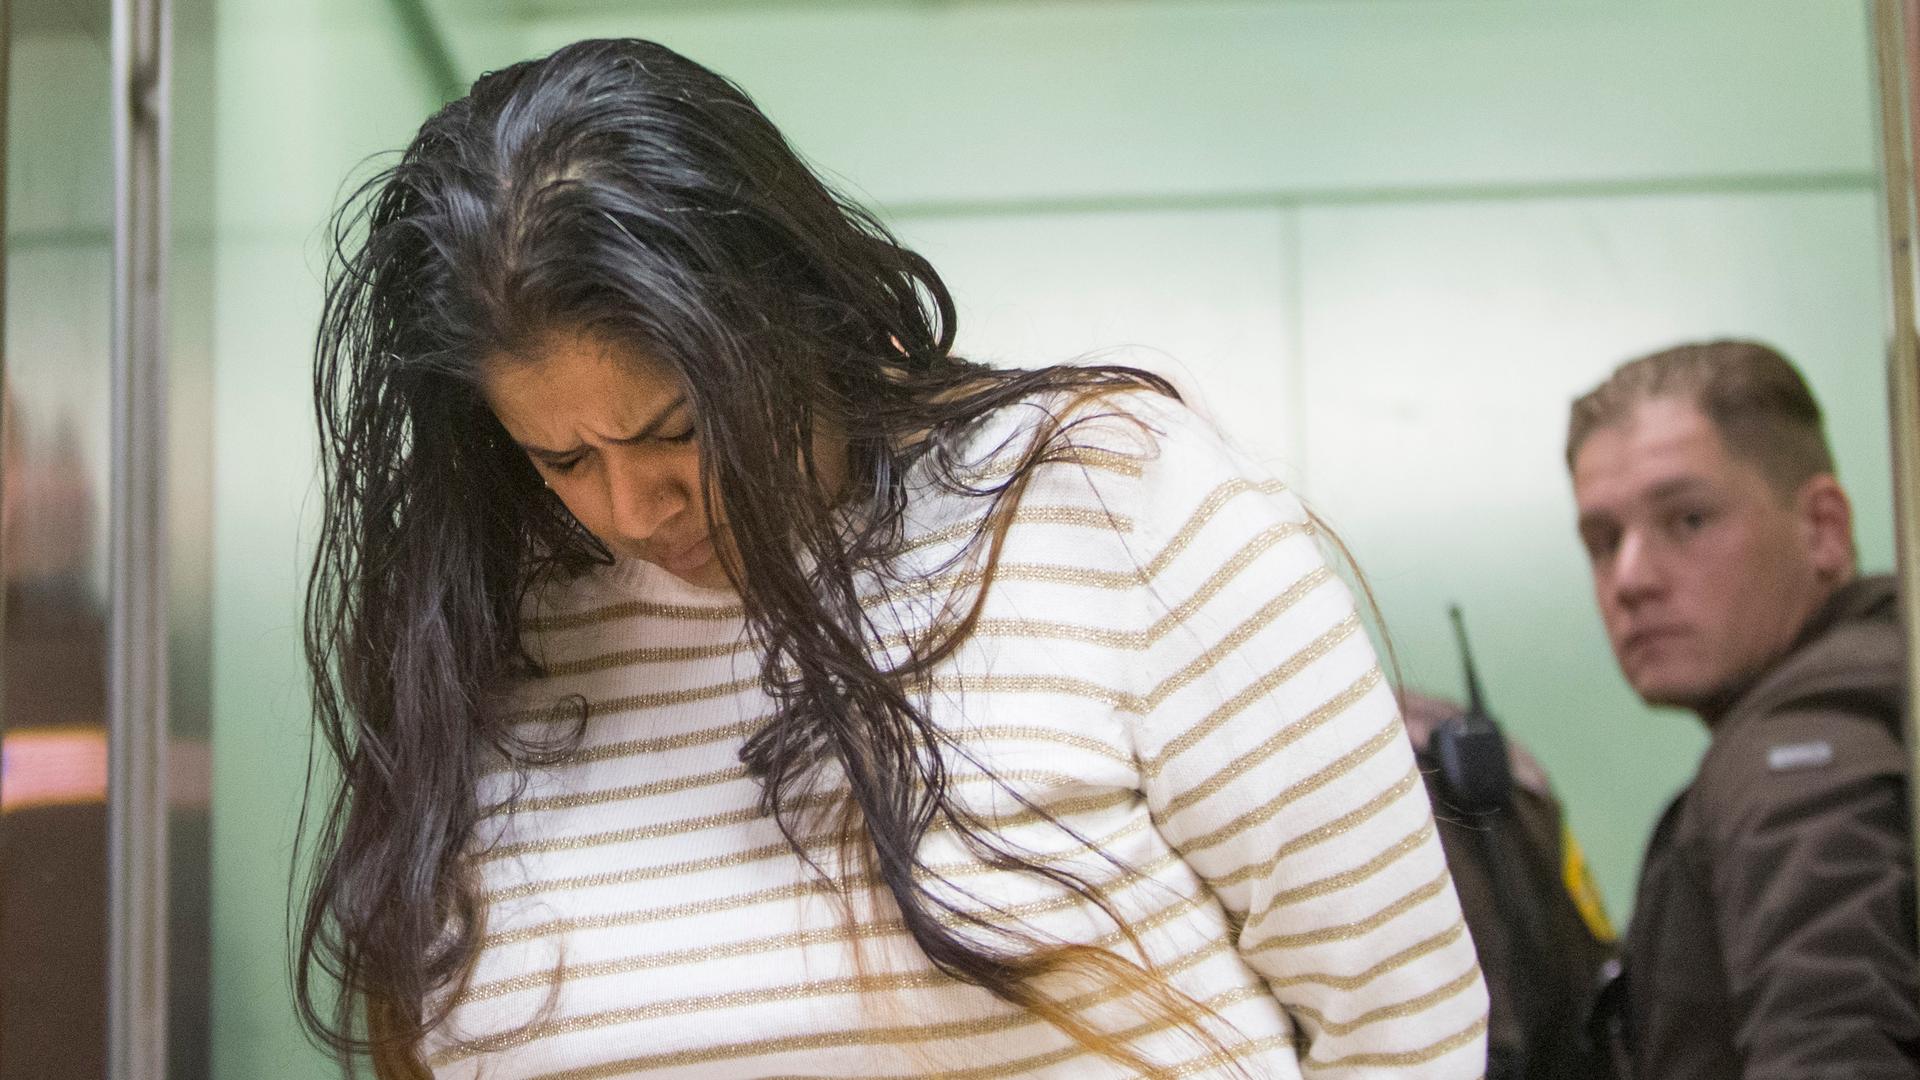 Purvi Patel is taken into custody after being sentenced to 20 years in prison for feticide and neglect of a dependent on Monday, March 30, 2015, at the St. Joseph County Courthouse in South Bend, Ind. 